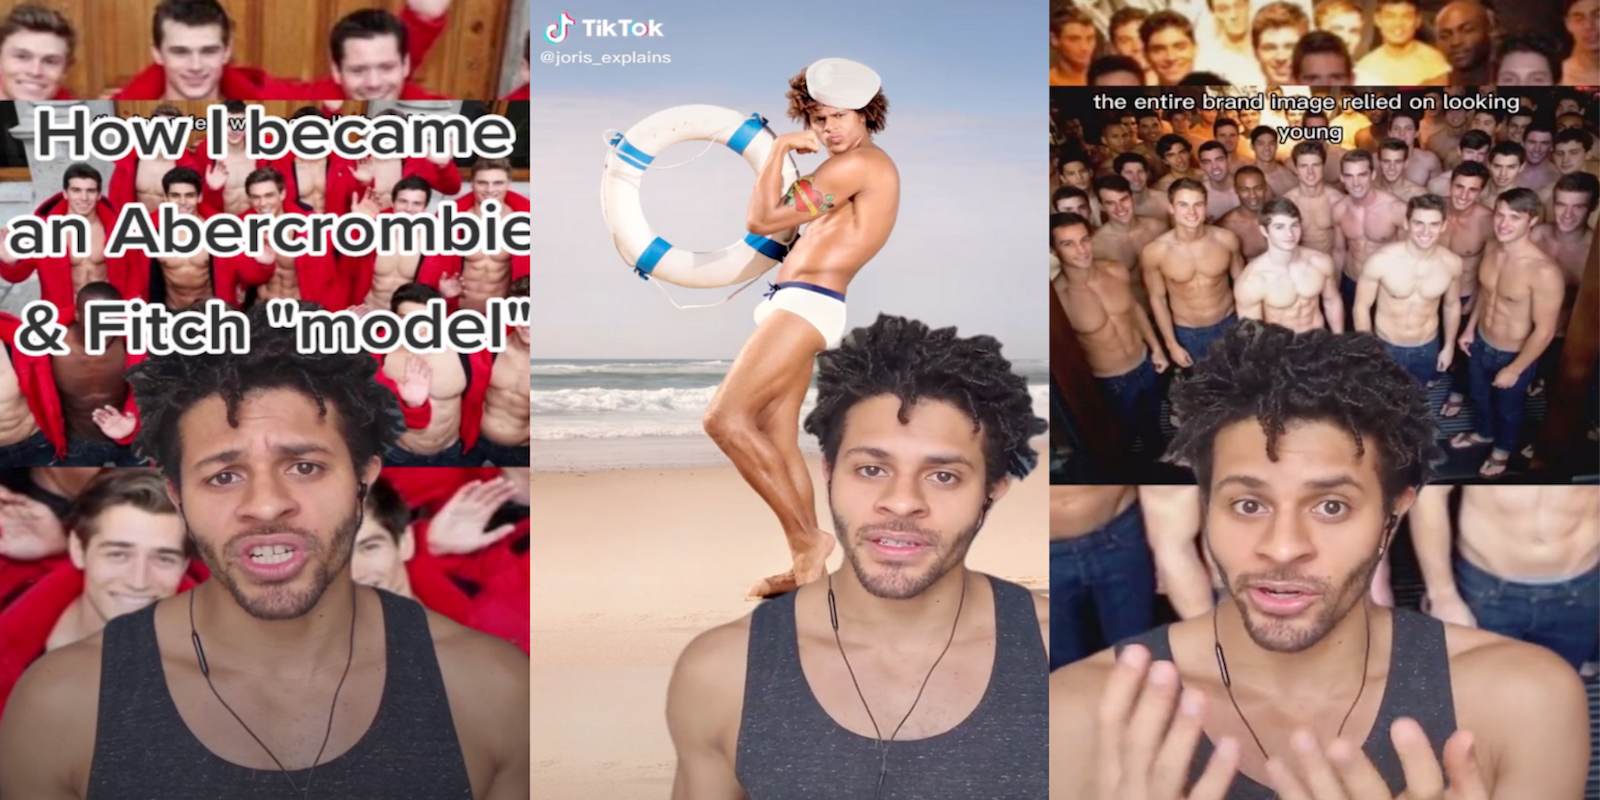 Screenshots from a TikTok of a former Abercrombie & Fitch model exposing the secrets and labor practices of the company